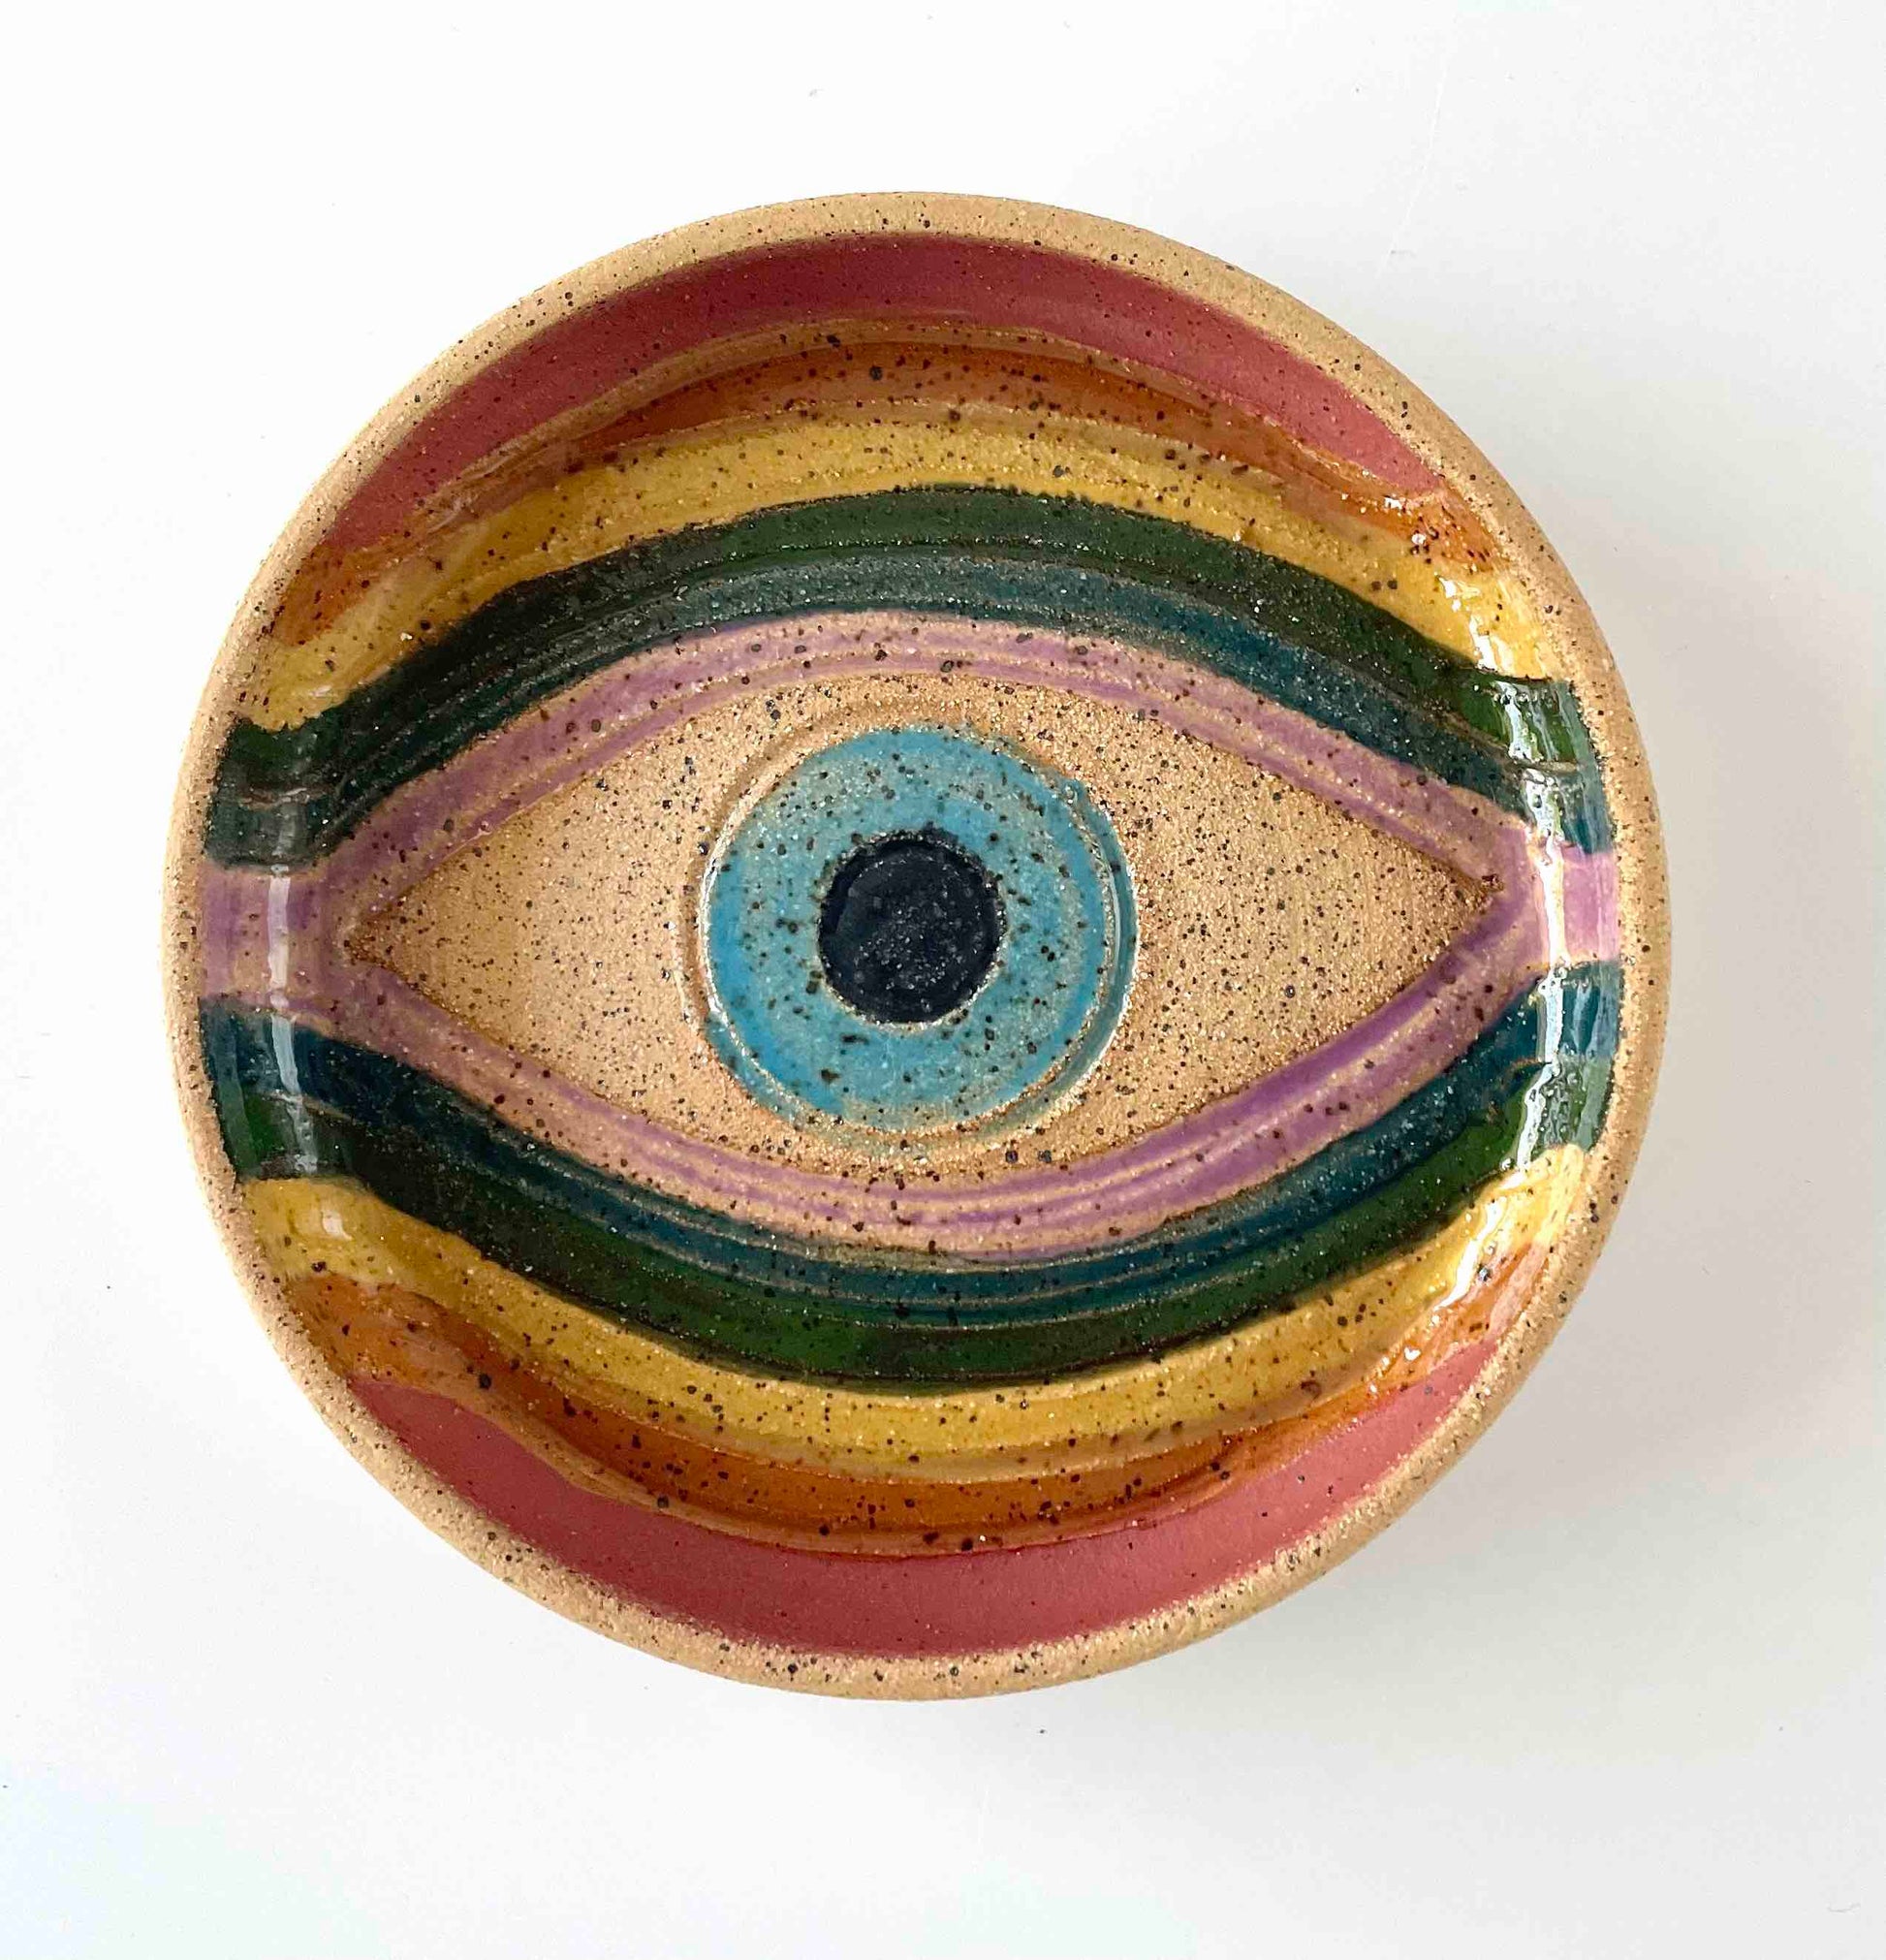 evil eye catch all with hand paitned rainbow detail by Hey Moon Ceramics